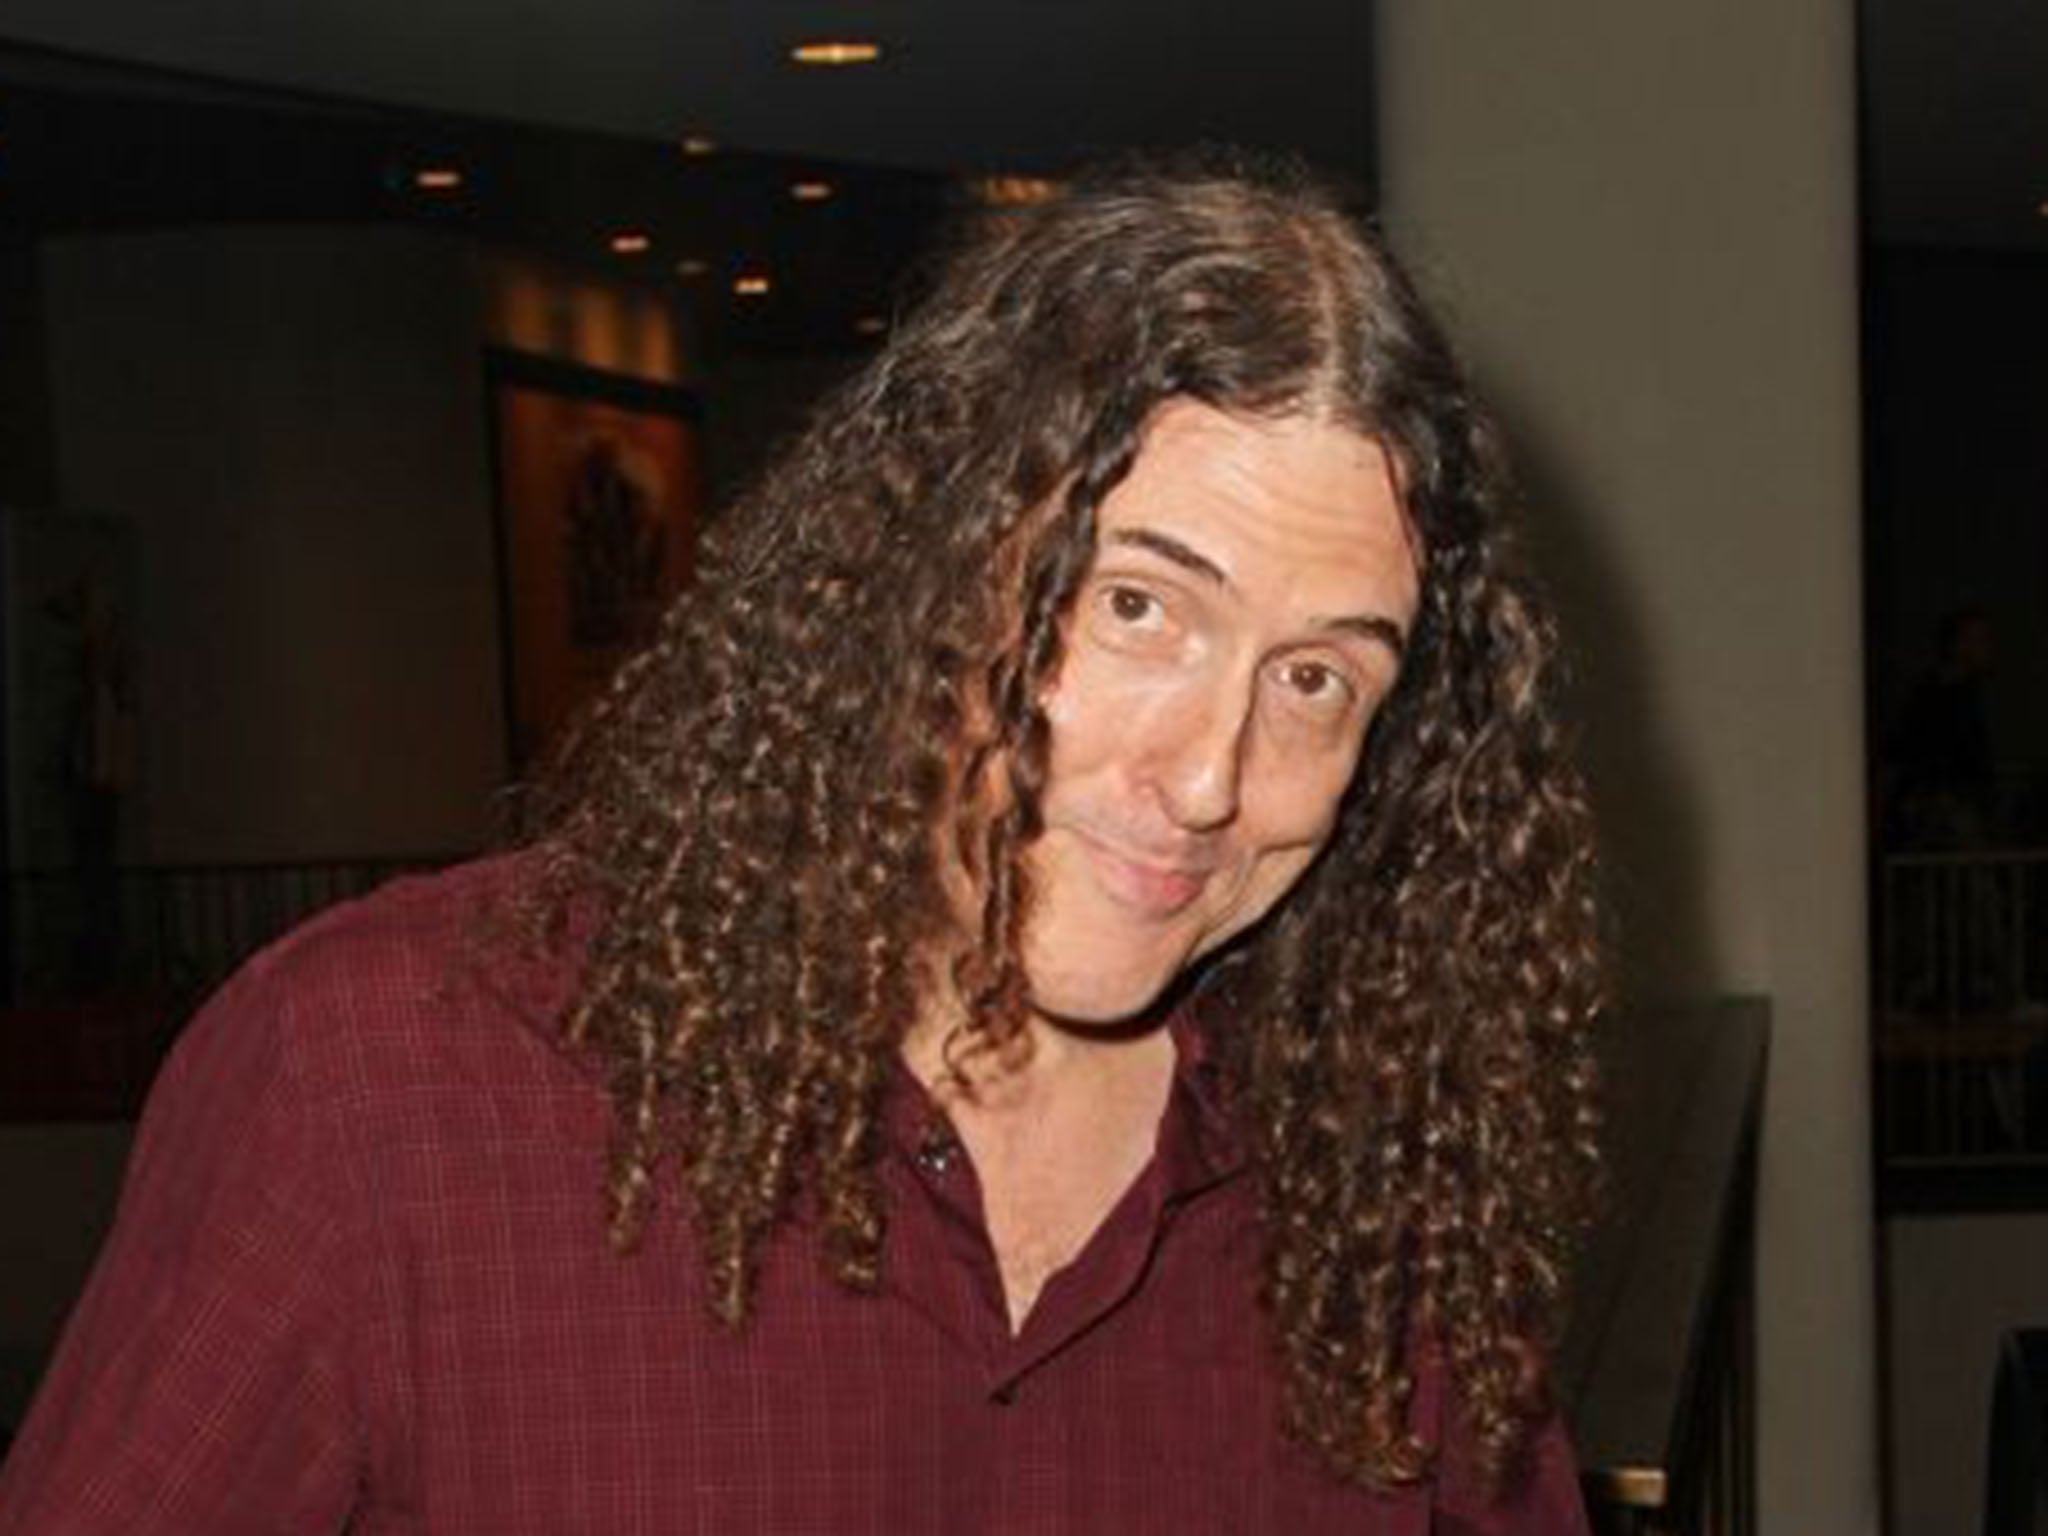 'Weird Al' Yankovic, or Alfred Matthew, at the 2014 Los Angeles Film Festival Screening of "They Came Together"